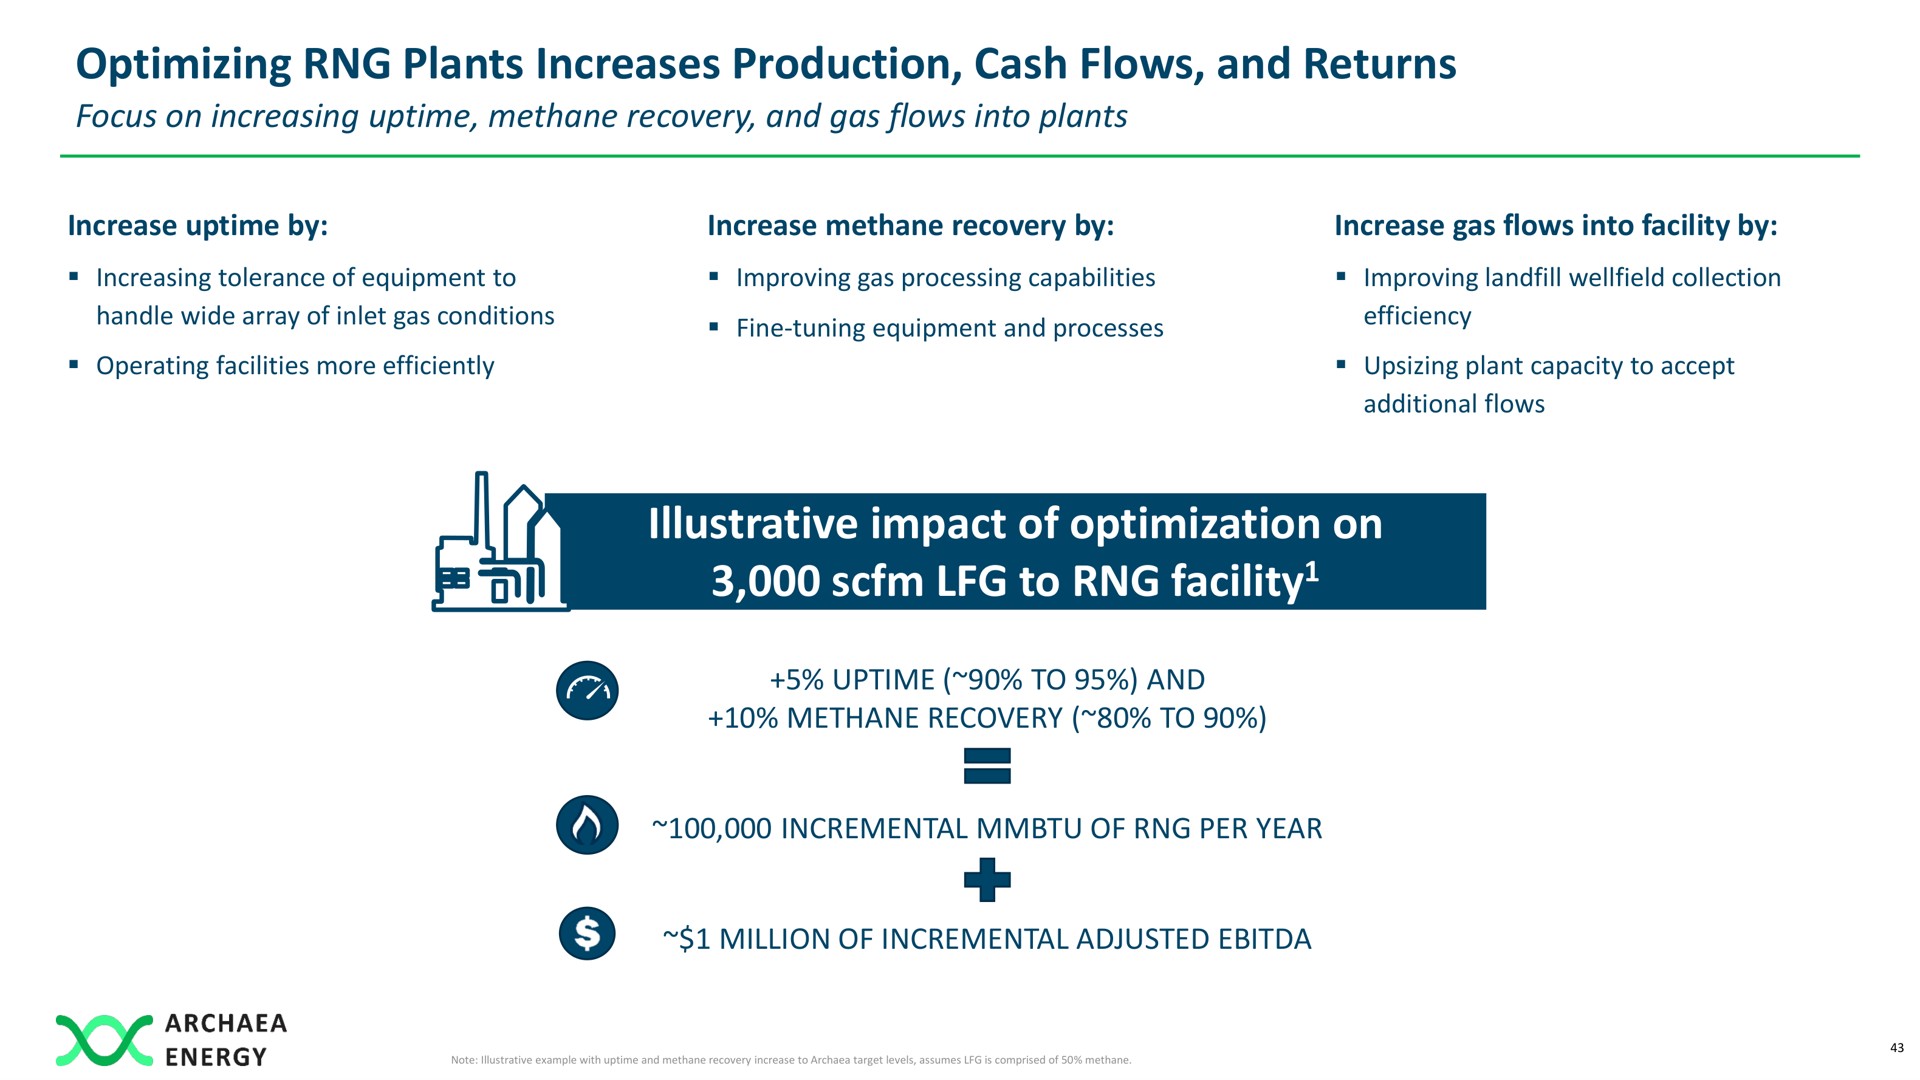 optimizing plants increases production cash flows and returns illustrative impact of optimization on to facility facility | Archaea Energy